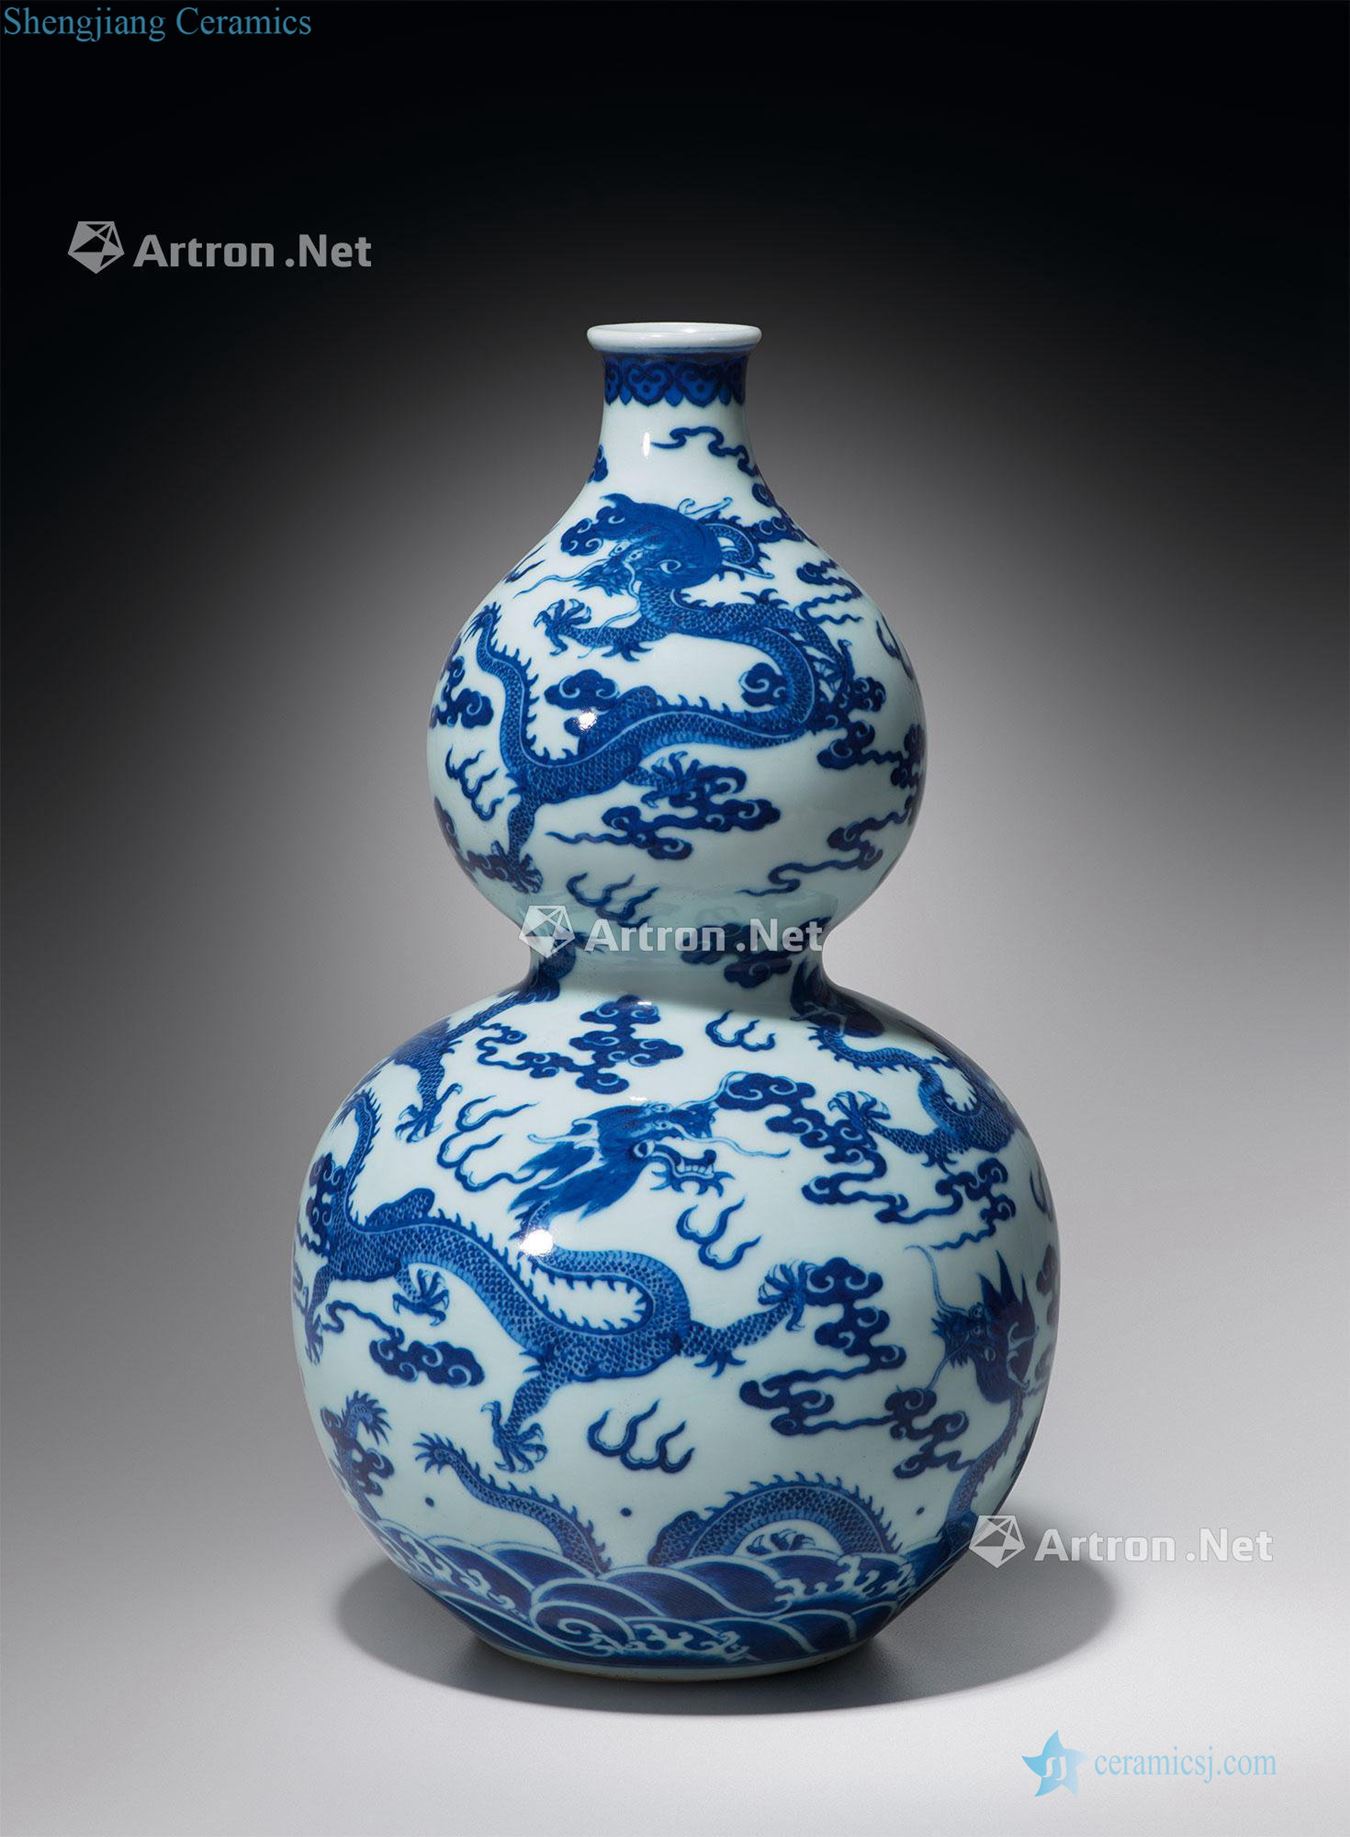 Qing daoguang Blue and white Kowloon in grain bottle gourd